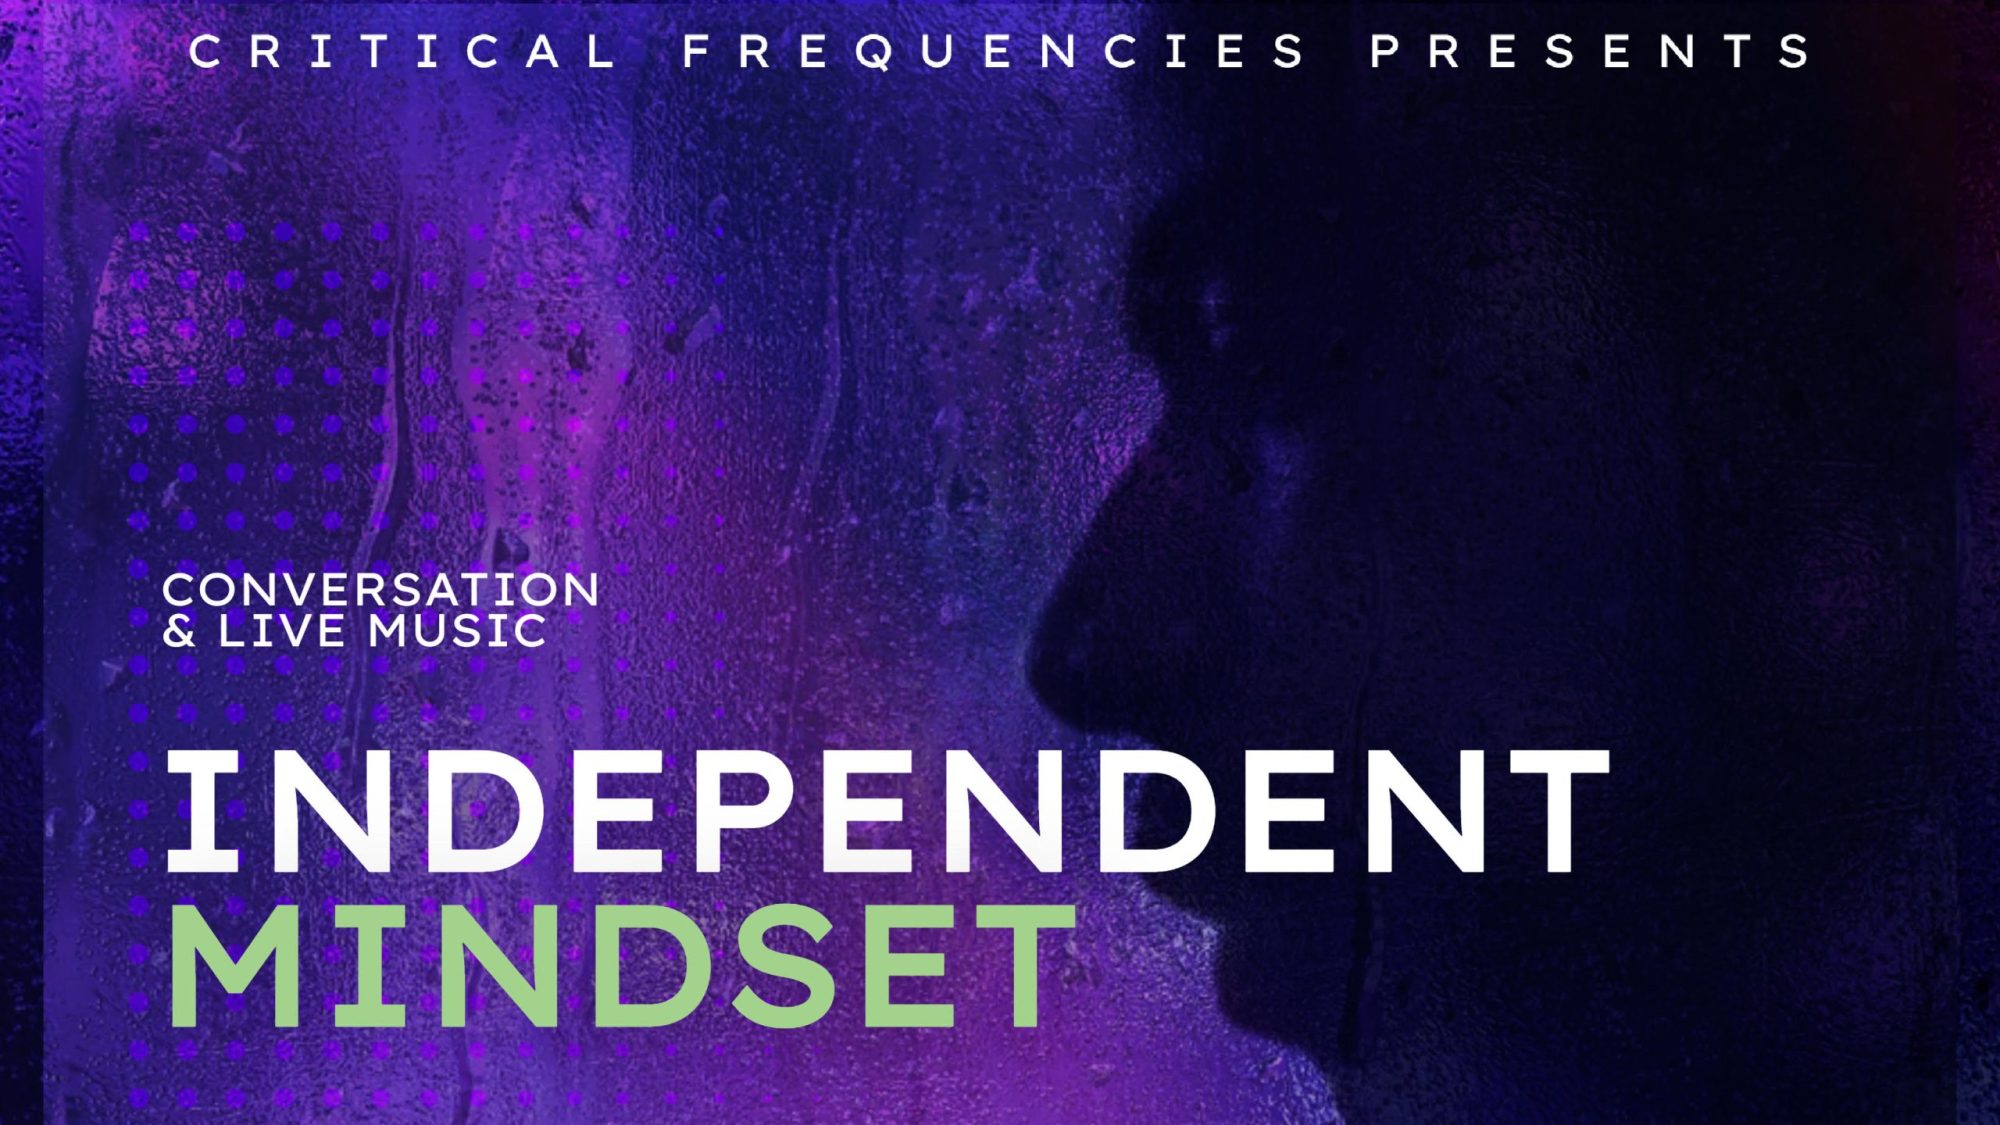 Graphic with face in shadow in front of purple backdrop with text, “Critical Frequencies presents: Conversation and Live Music: Independent Mindset.”